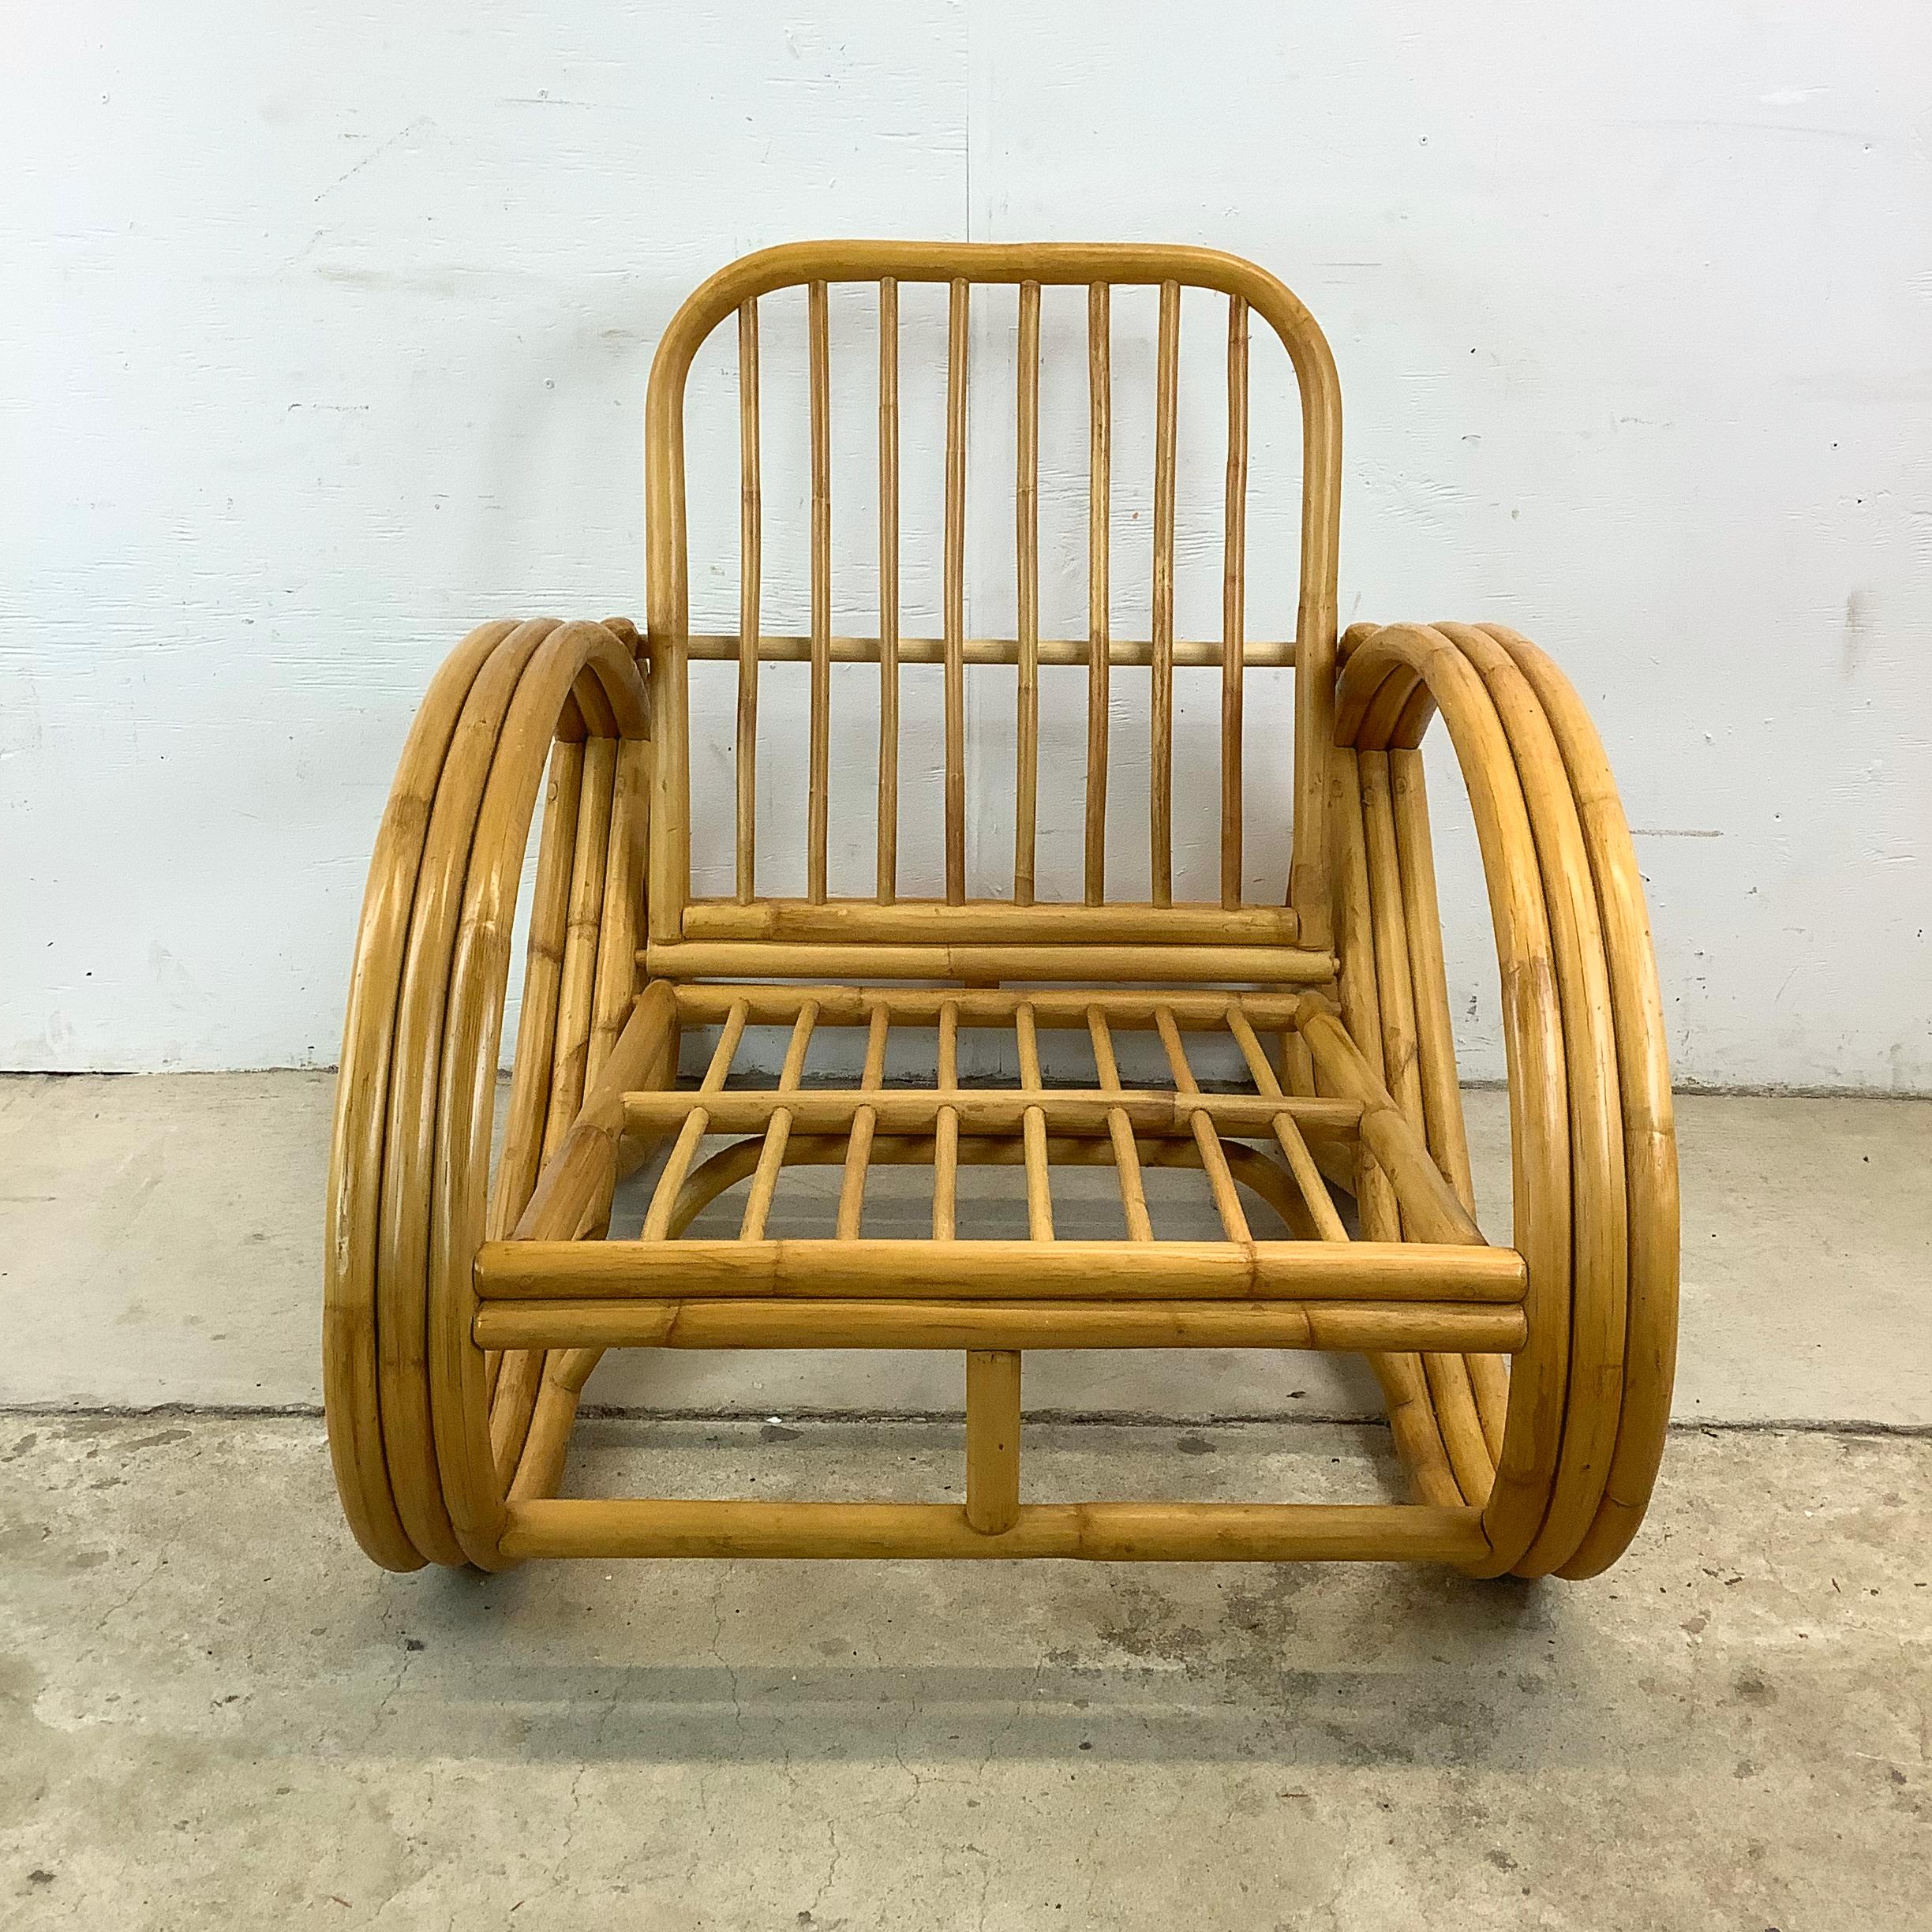 Introducing this Vintage Rattan and Bamboo Lounge Chair – a charming fusion of comfort, style, and sustainability inspired by the iconic Paul Frankl design. Crafted with natural bamboo this lounge chair embodies the warmth and elegance of